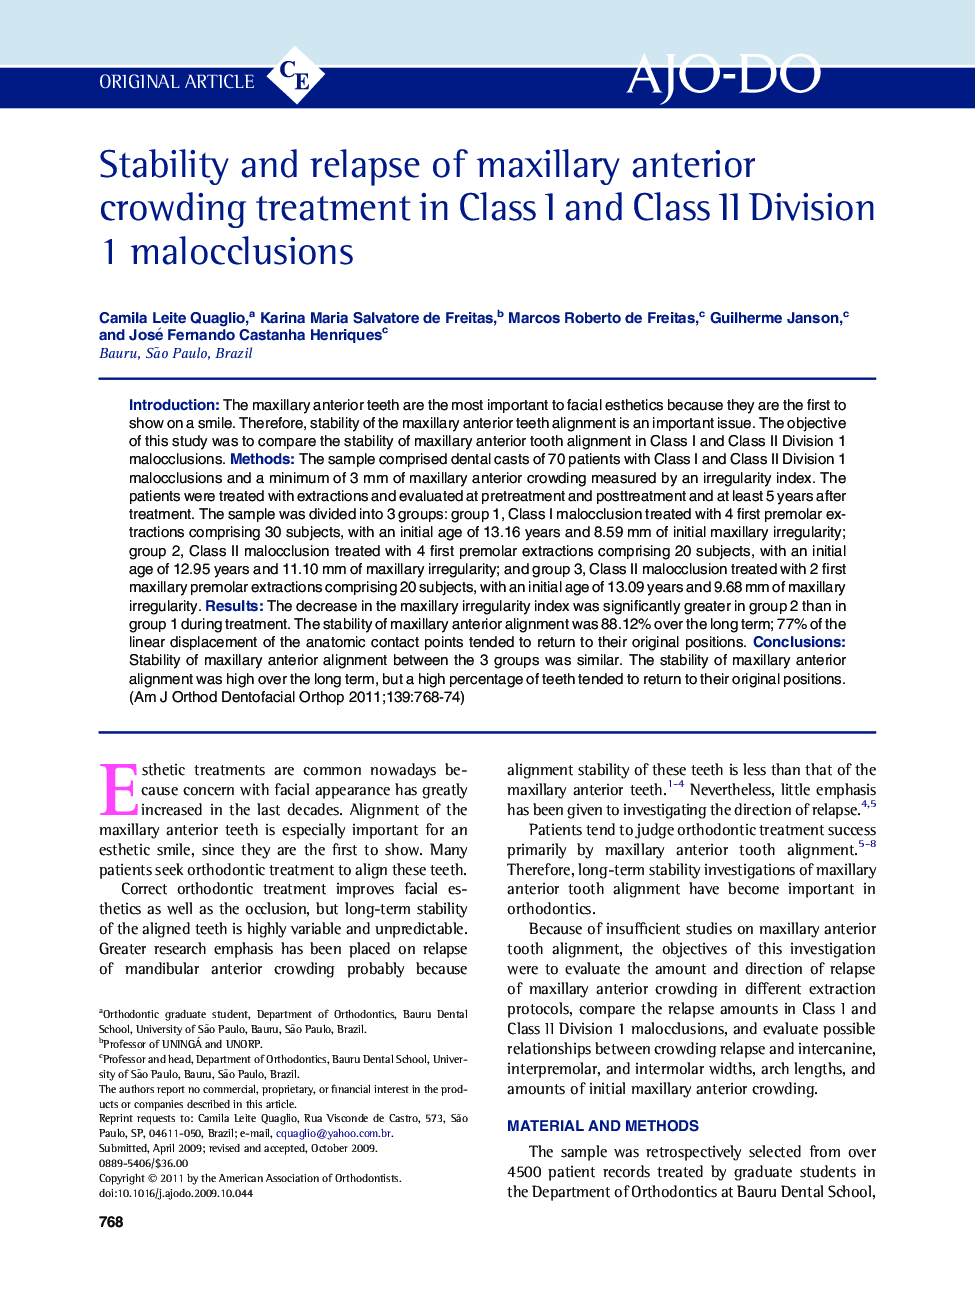 Stability and relapse of maxillary anterior crowding treatment in Class I and Class II Division 1 malocclusions 